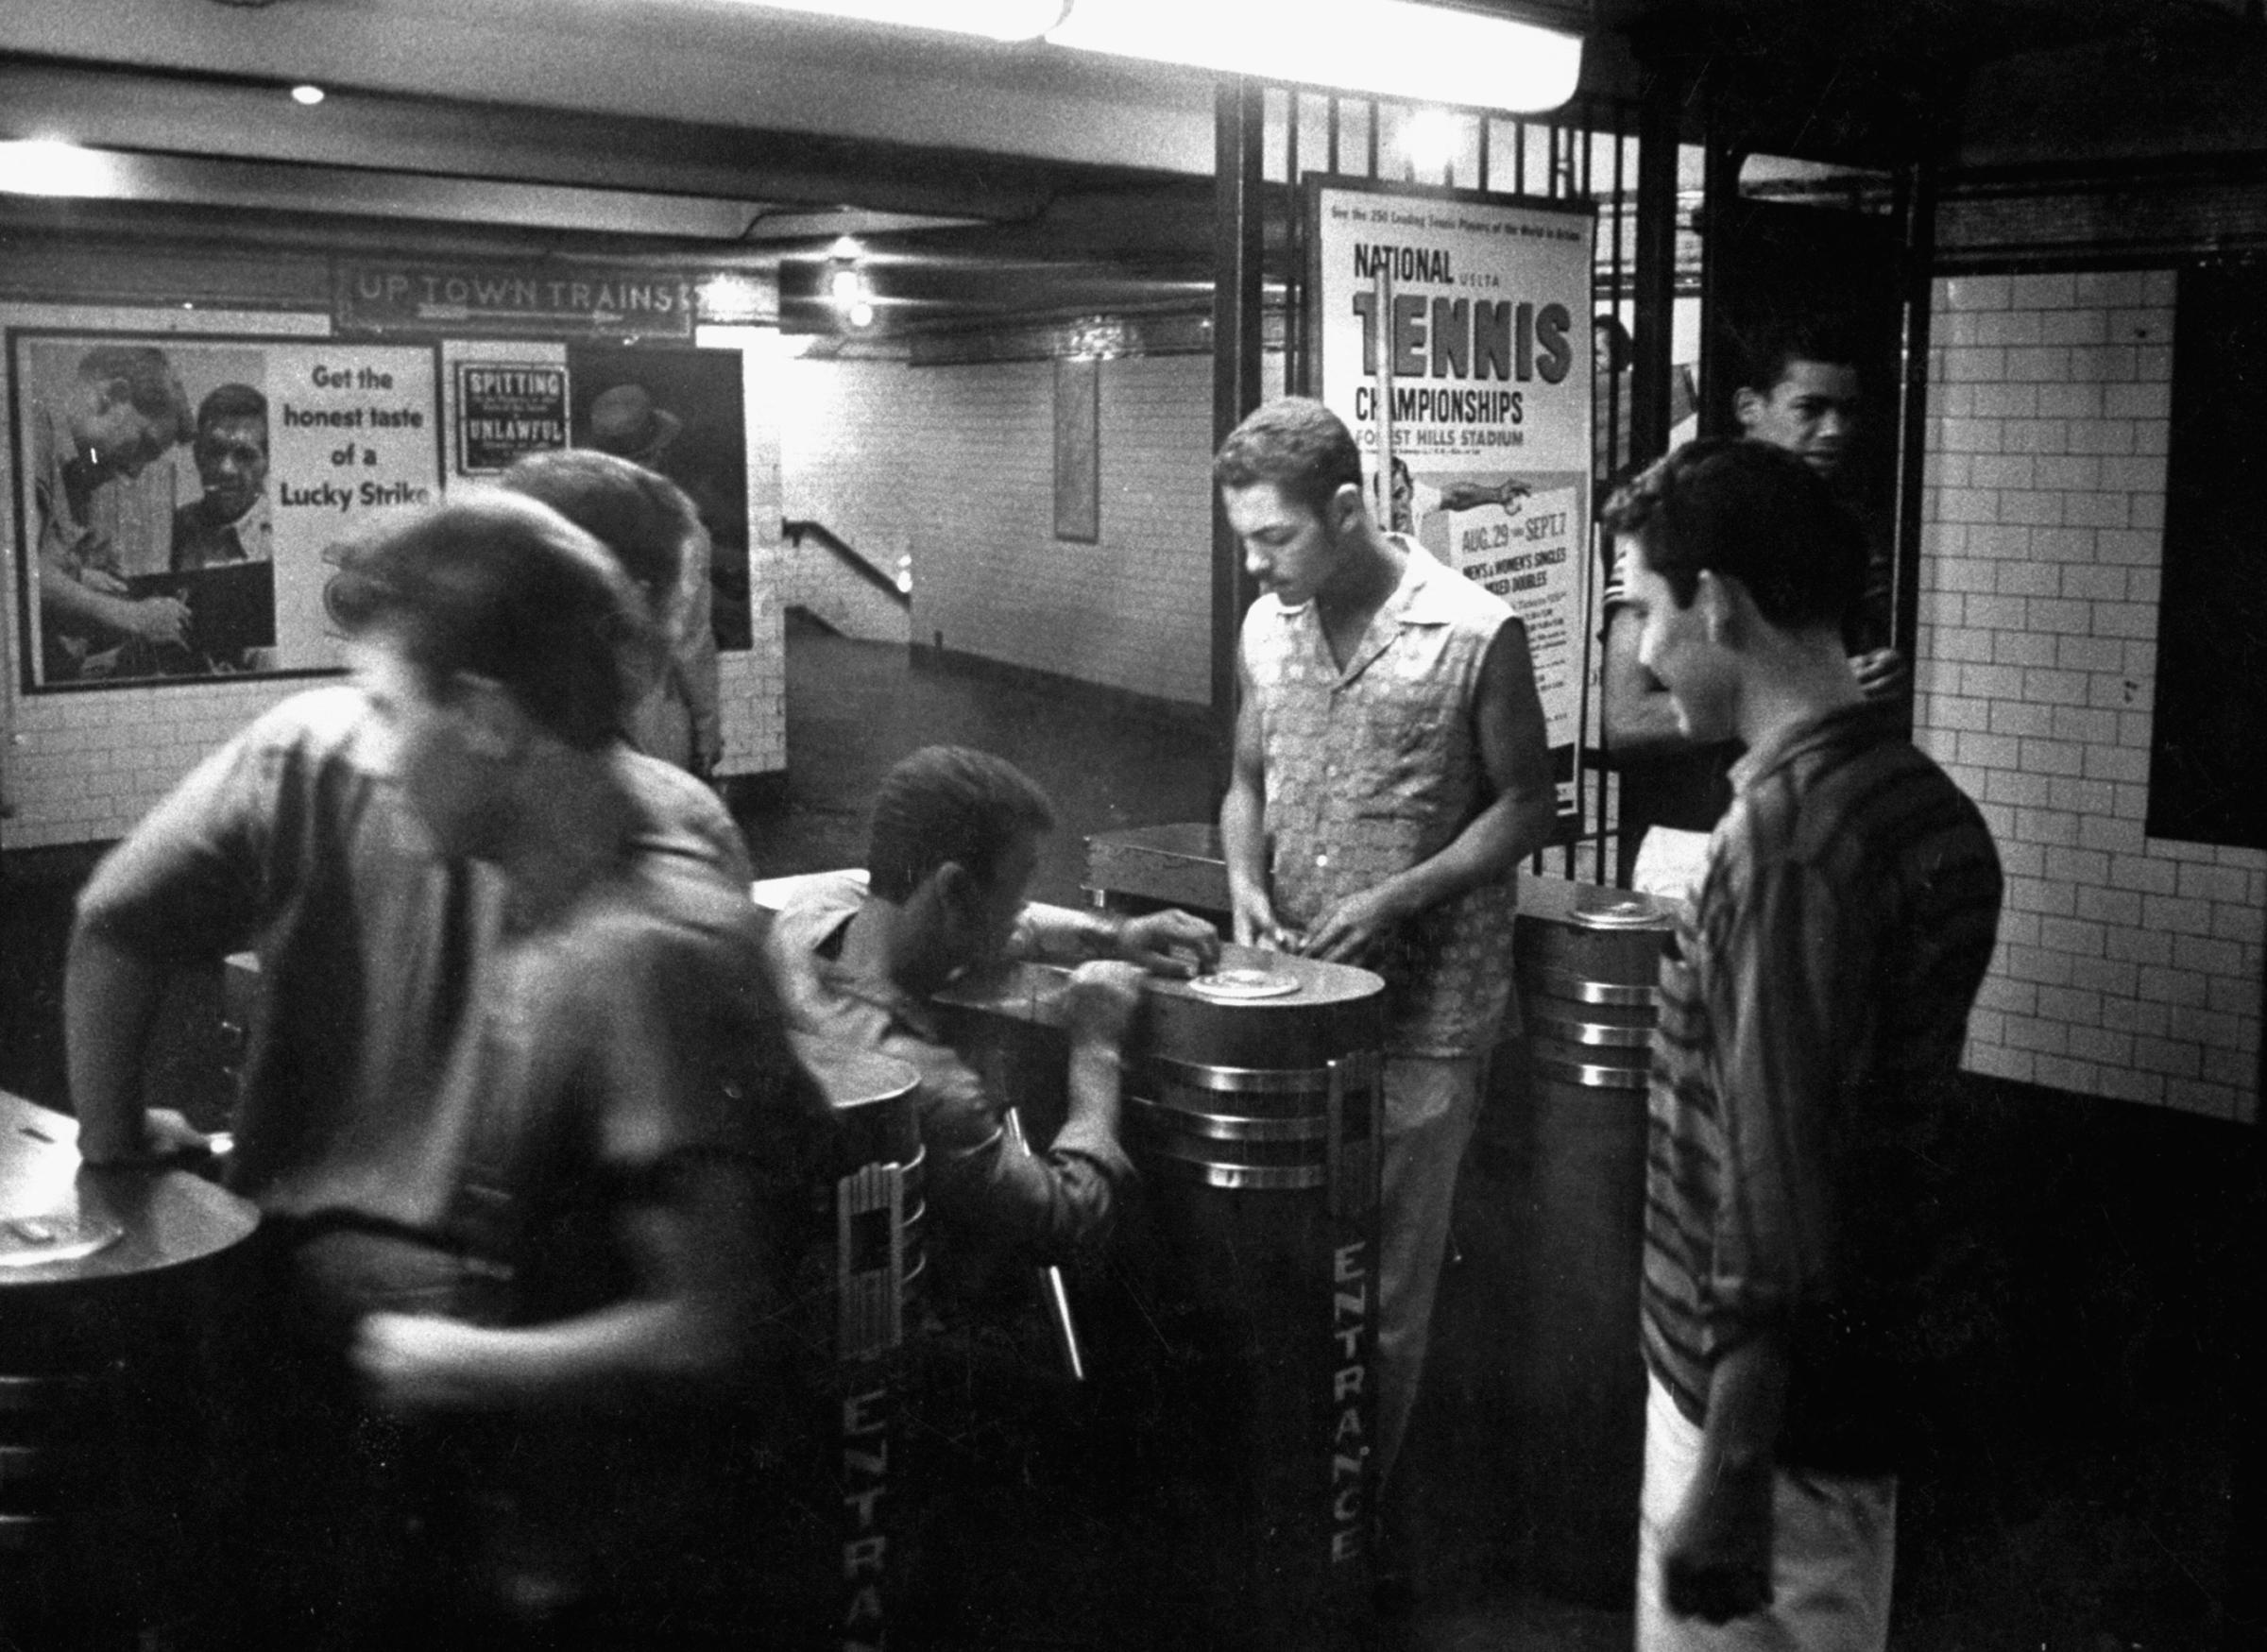 Teenagers trying to work the subway turnstiles with slugs instead of tokens, 1958.